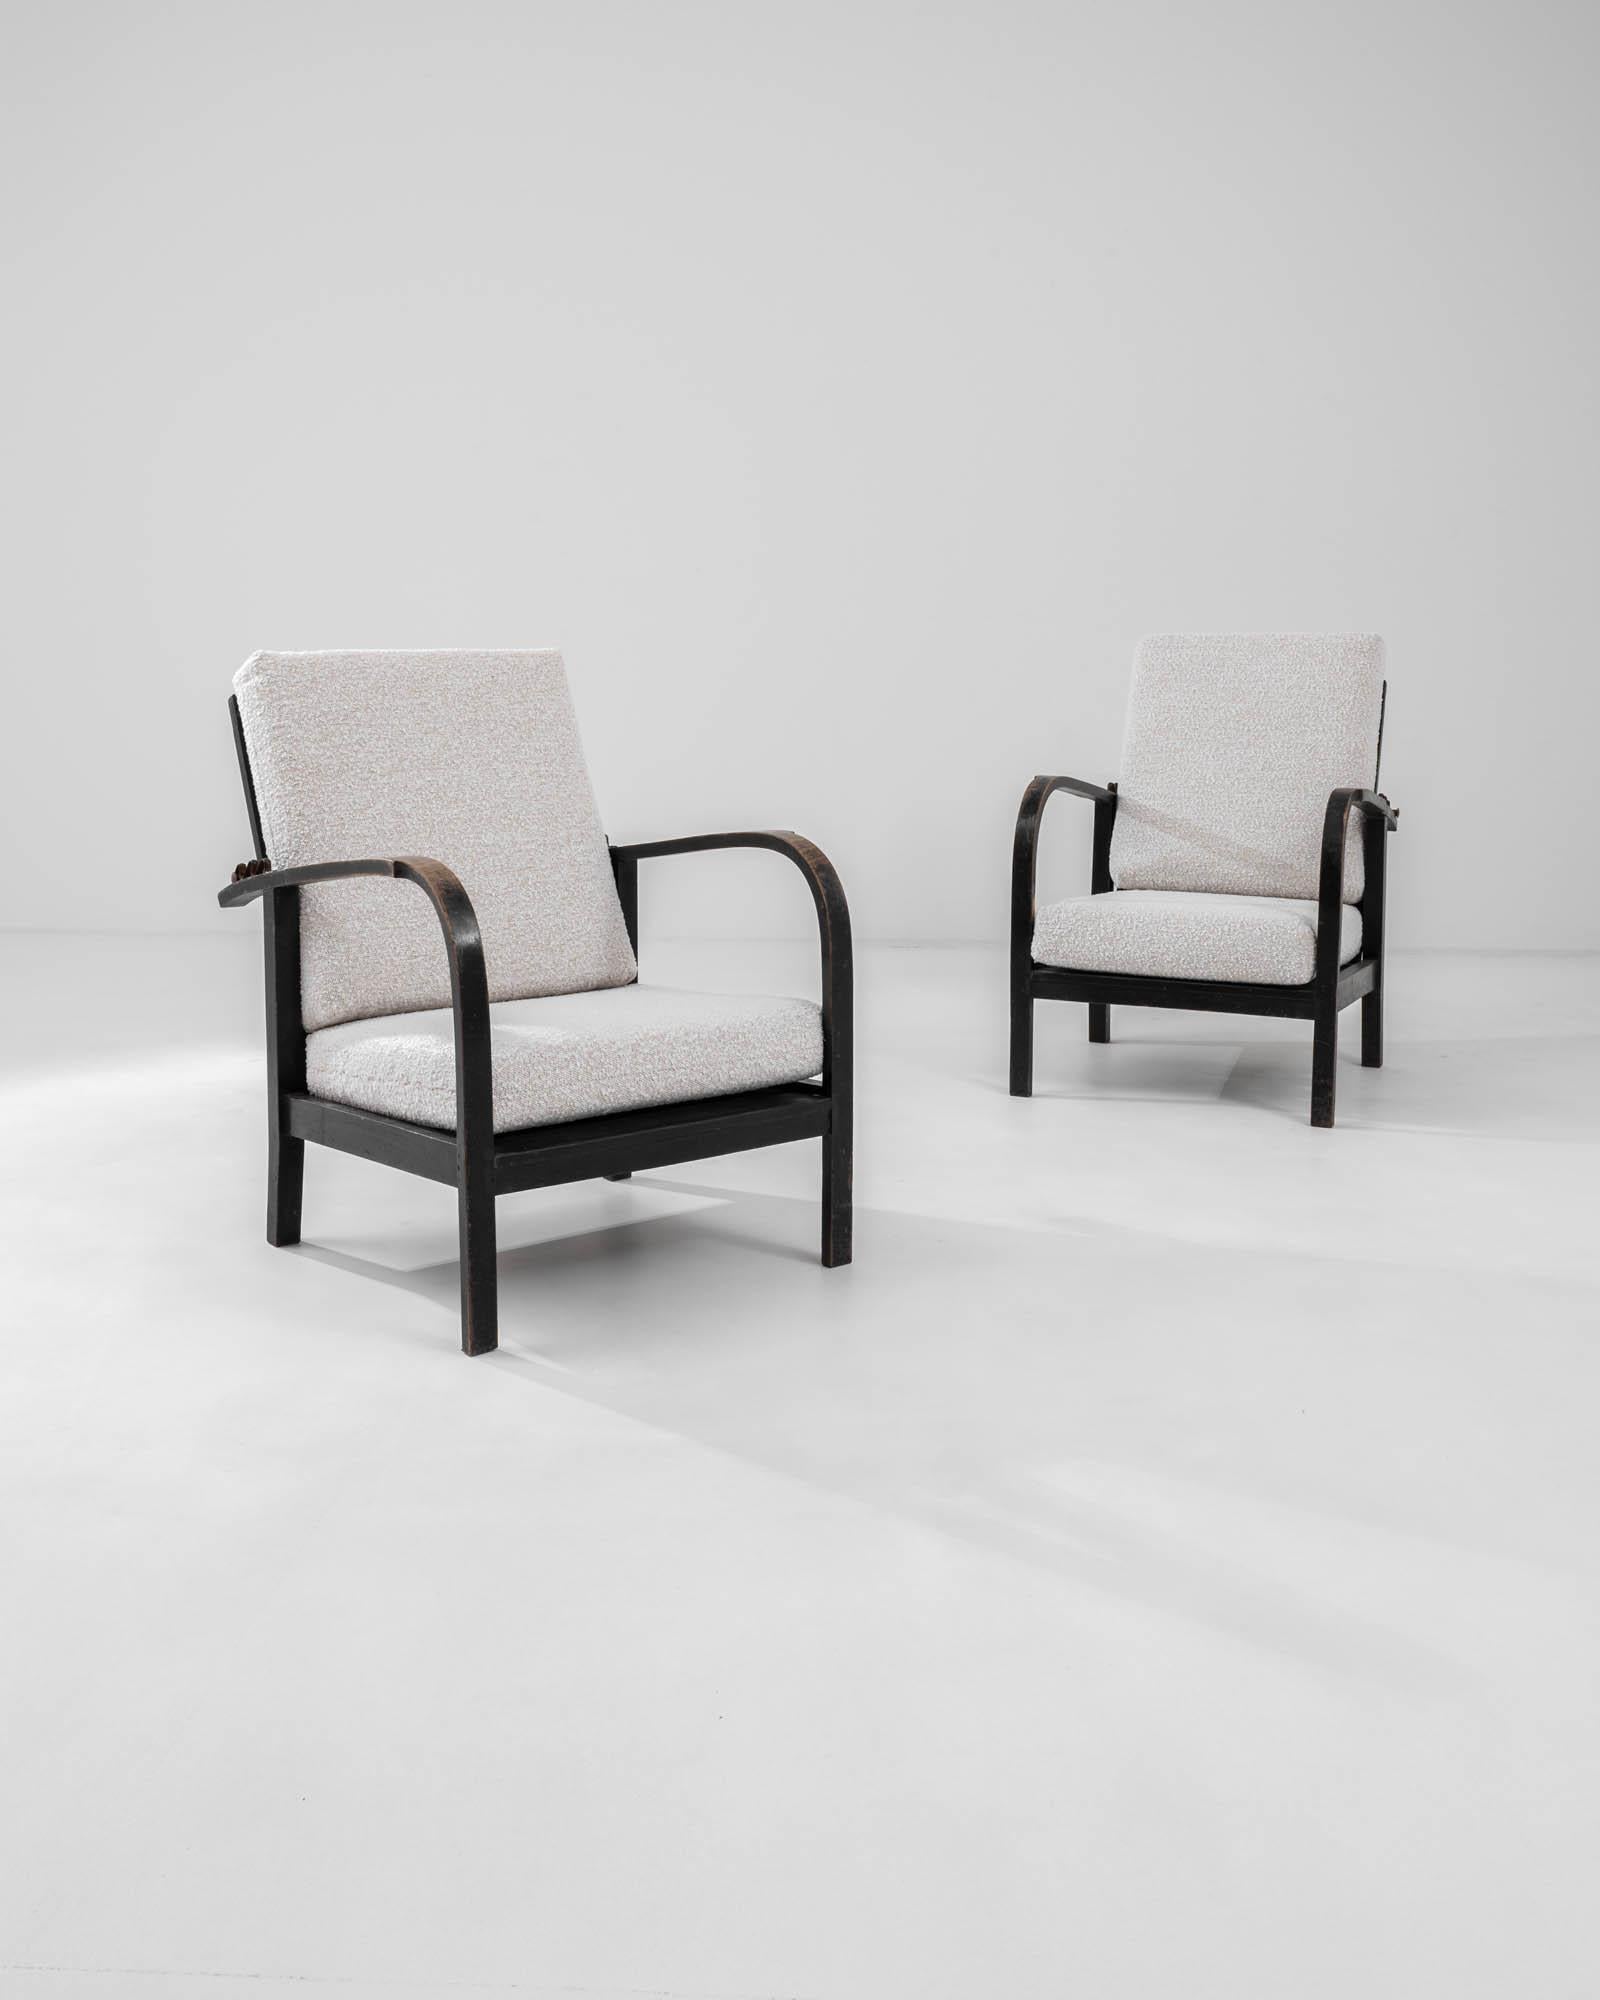 A pair of wooden upholstered armchairs created in 20th century central Europe. Characteristic of mid-century central European design, these chairs exude a forthright and functional demeanor that nonetheless is brimming with aesthetic charm. A simple